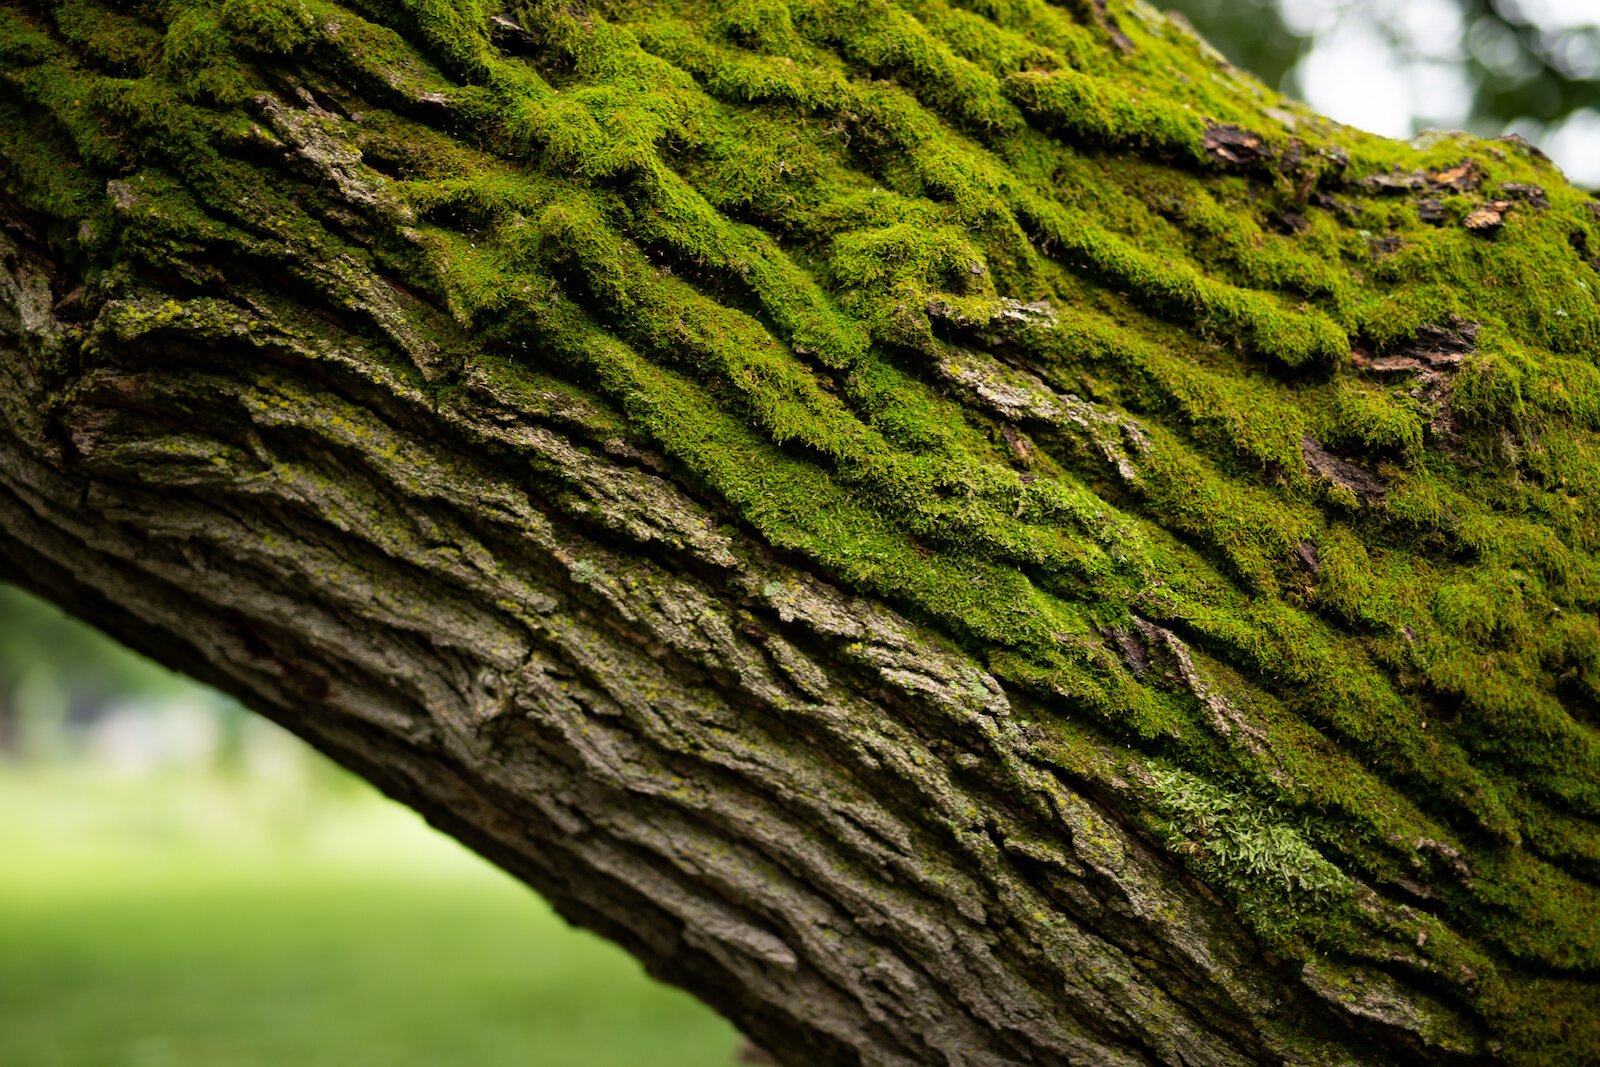 Moss grows on a Mulberry tree at Poplar Village Gardens.